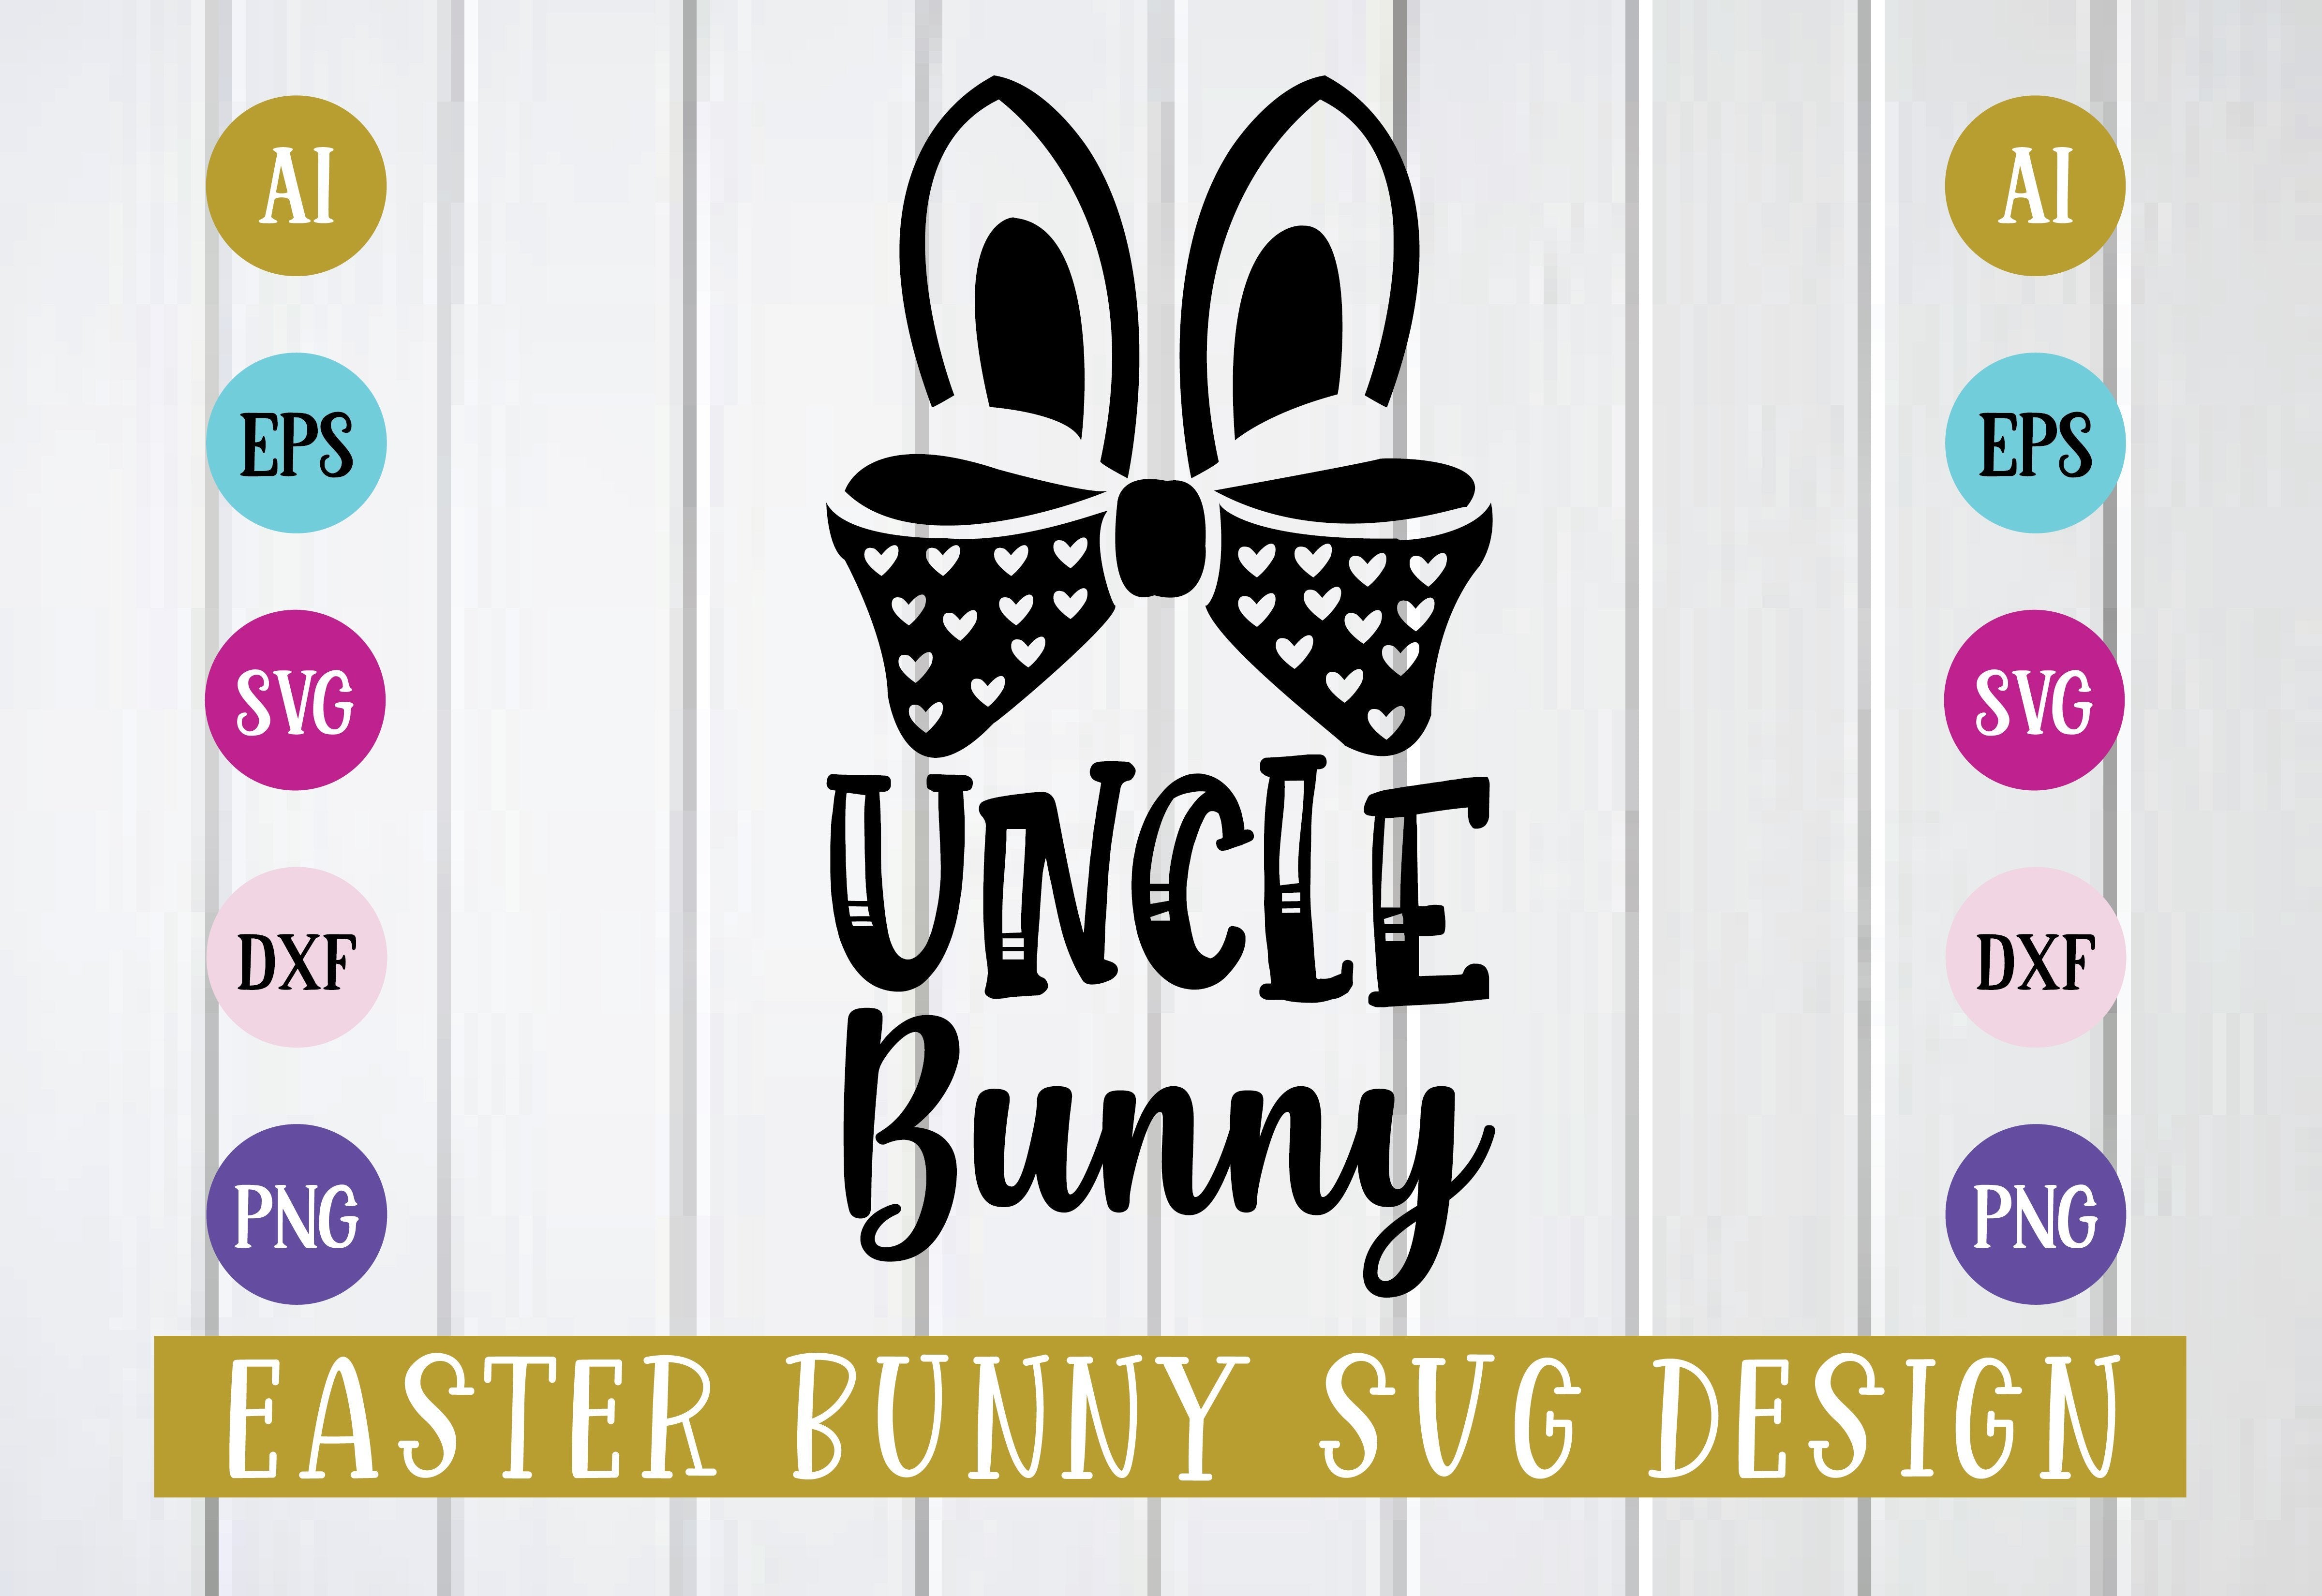 Download Cut File Design Silhouette Mama Bunny Printing Baby Bunny Svg Png Or More Dxf Cameo Instant Download Files For Cricut Design Space Painting Craft Supplies Tools Kromasol Com